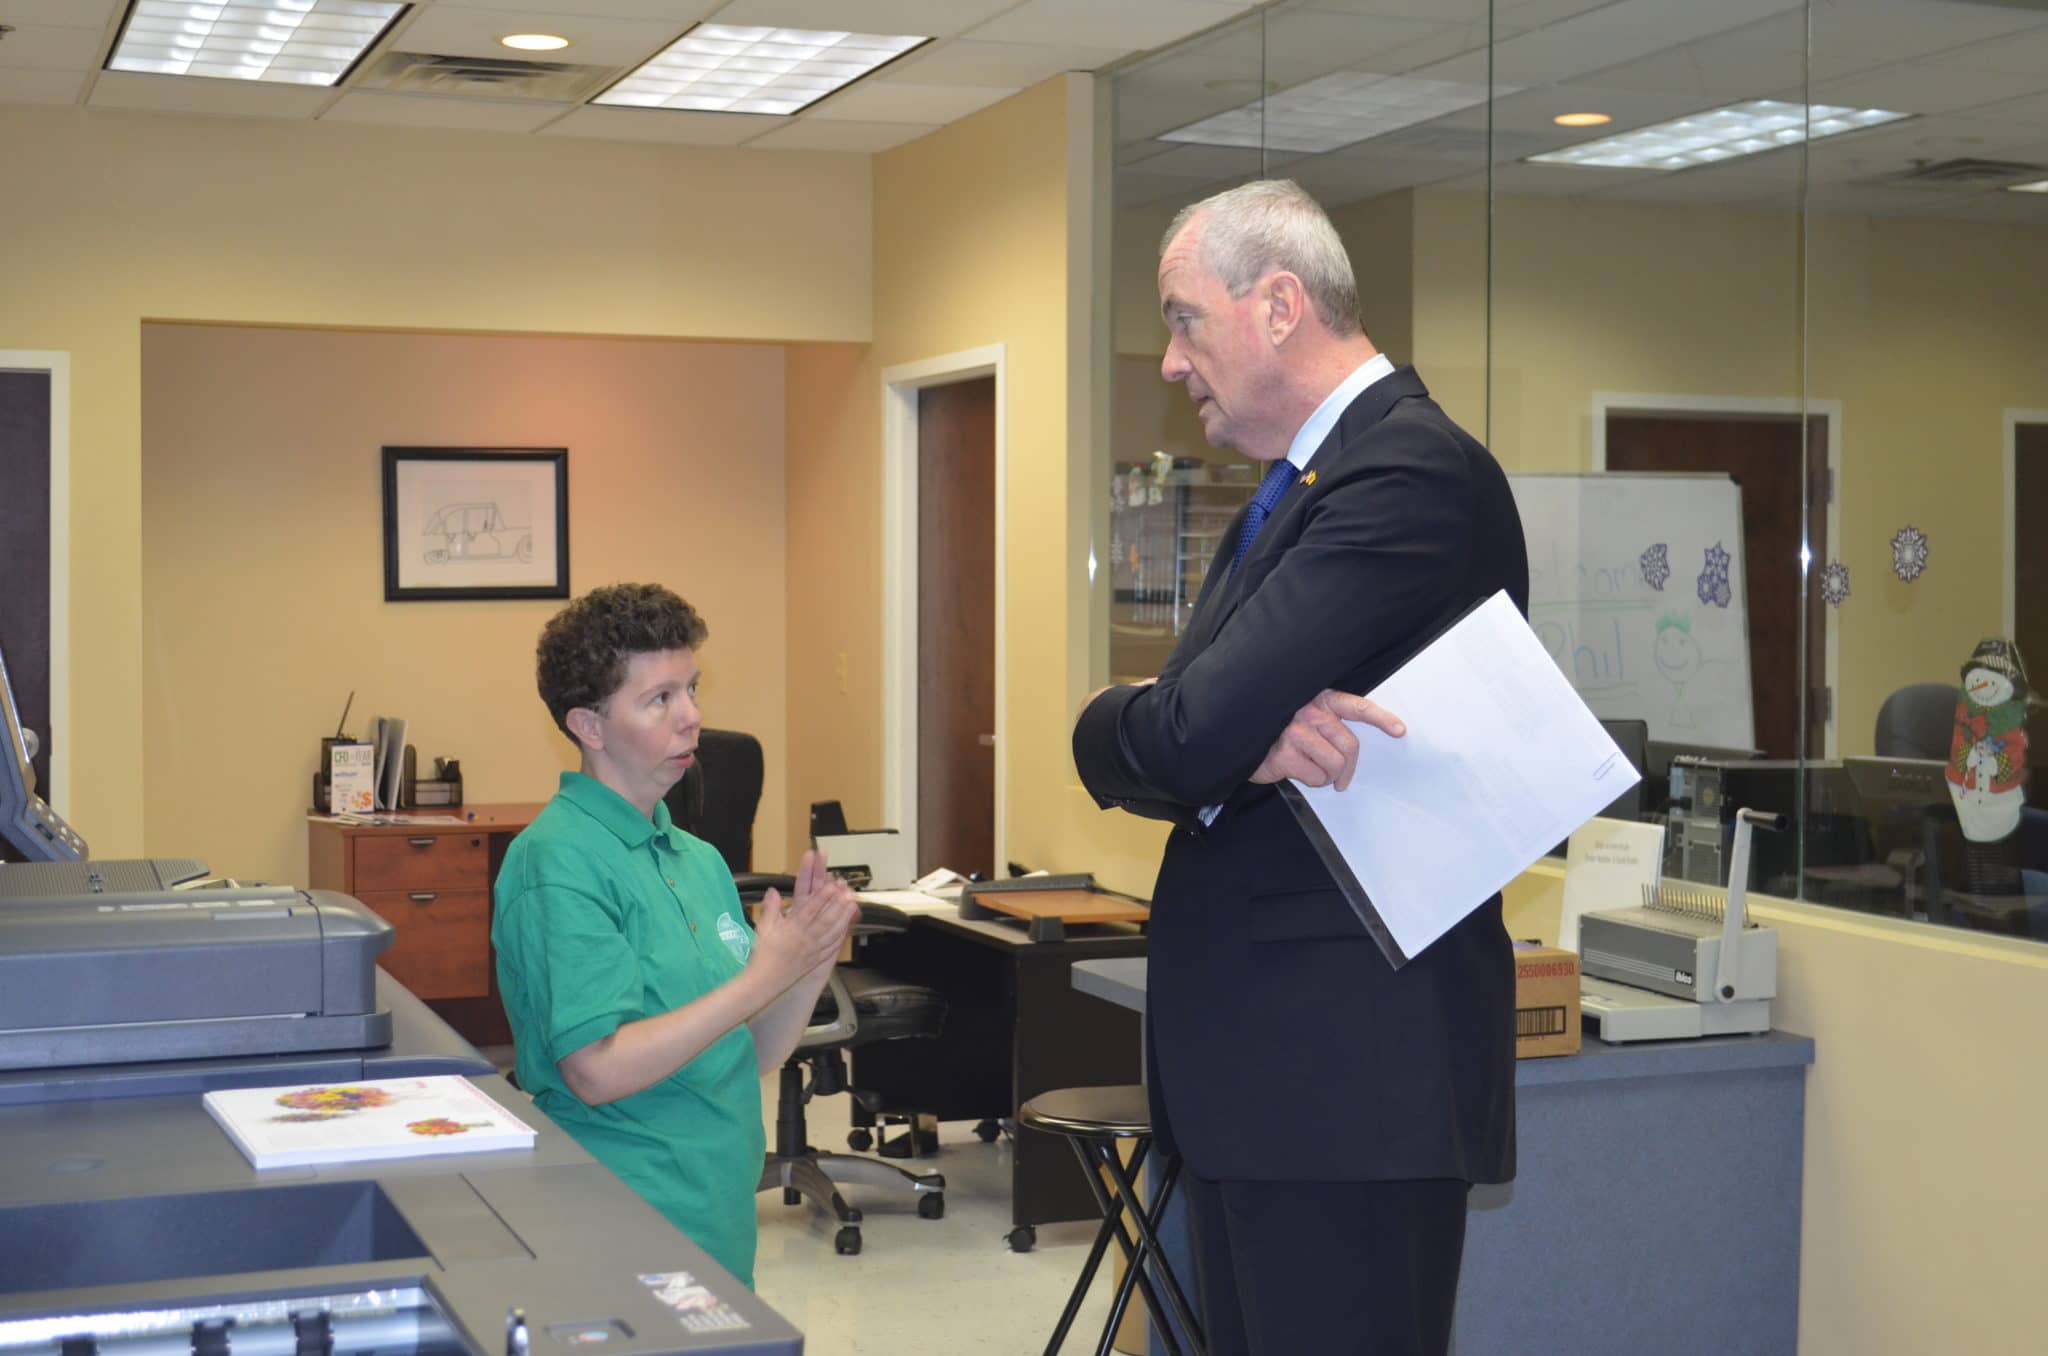 Katie T. shows 2017 New Jersey gubernatorial candidate Phil Murphy around the Daily Plan It in Princeton, NJ.